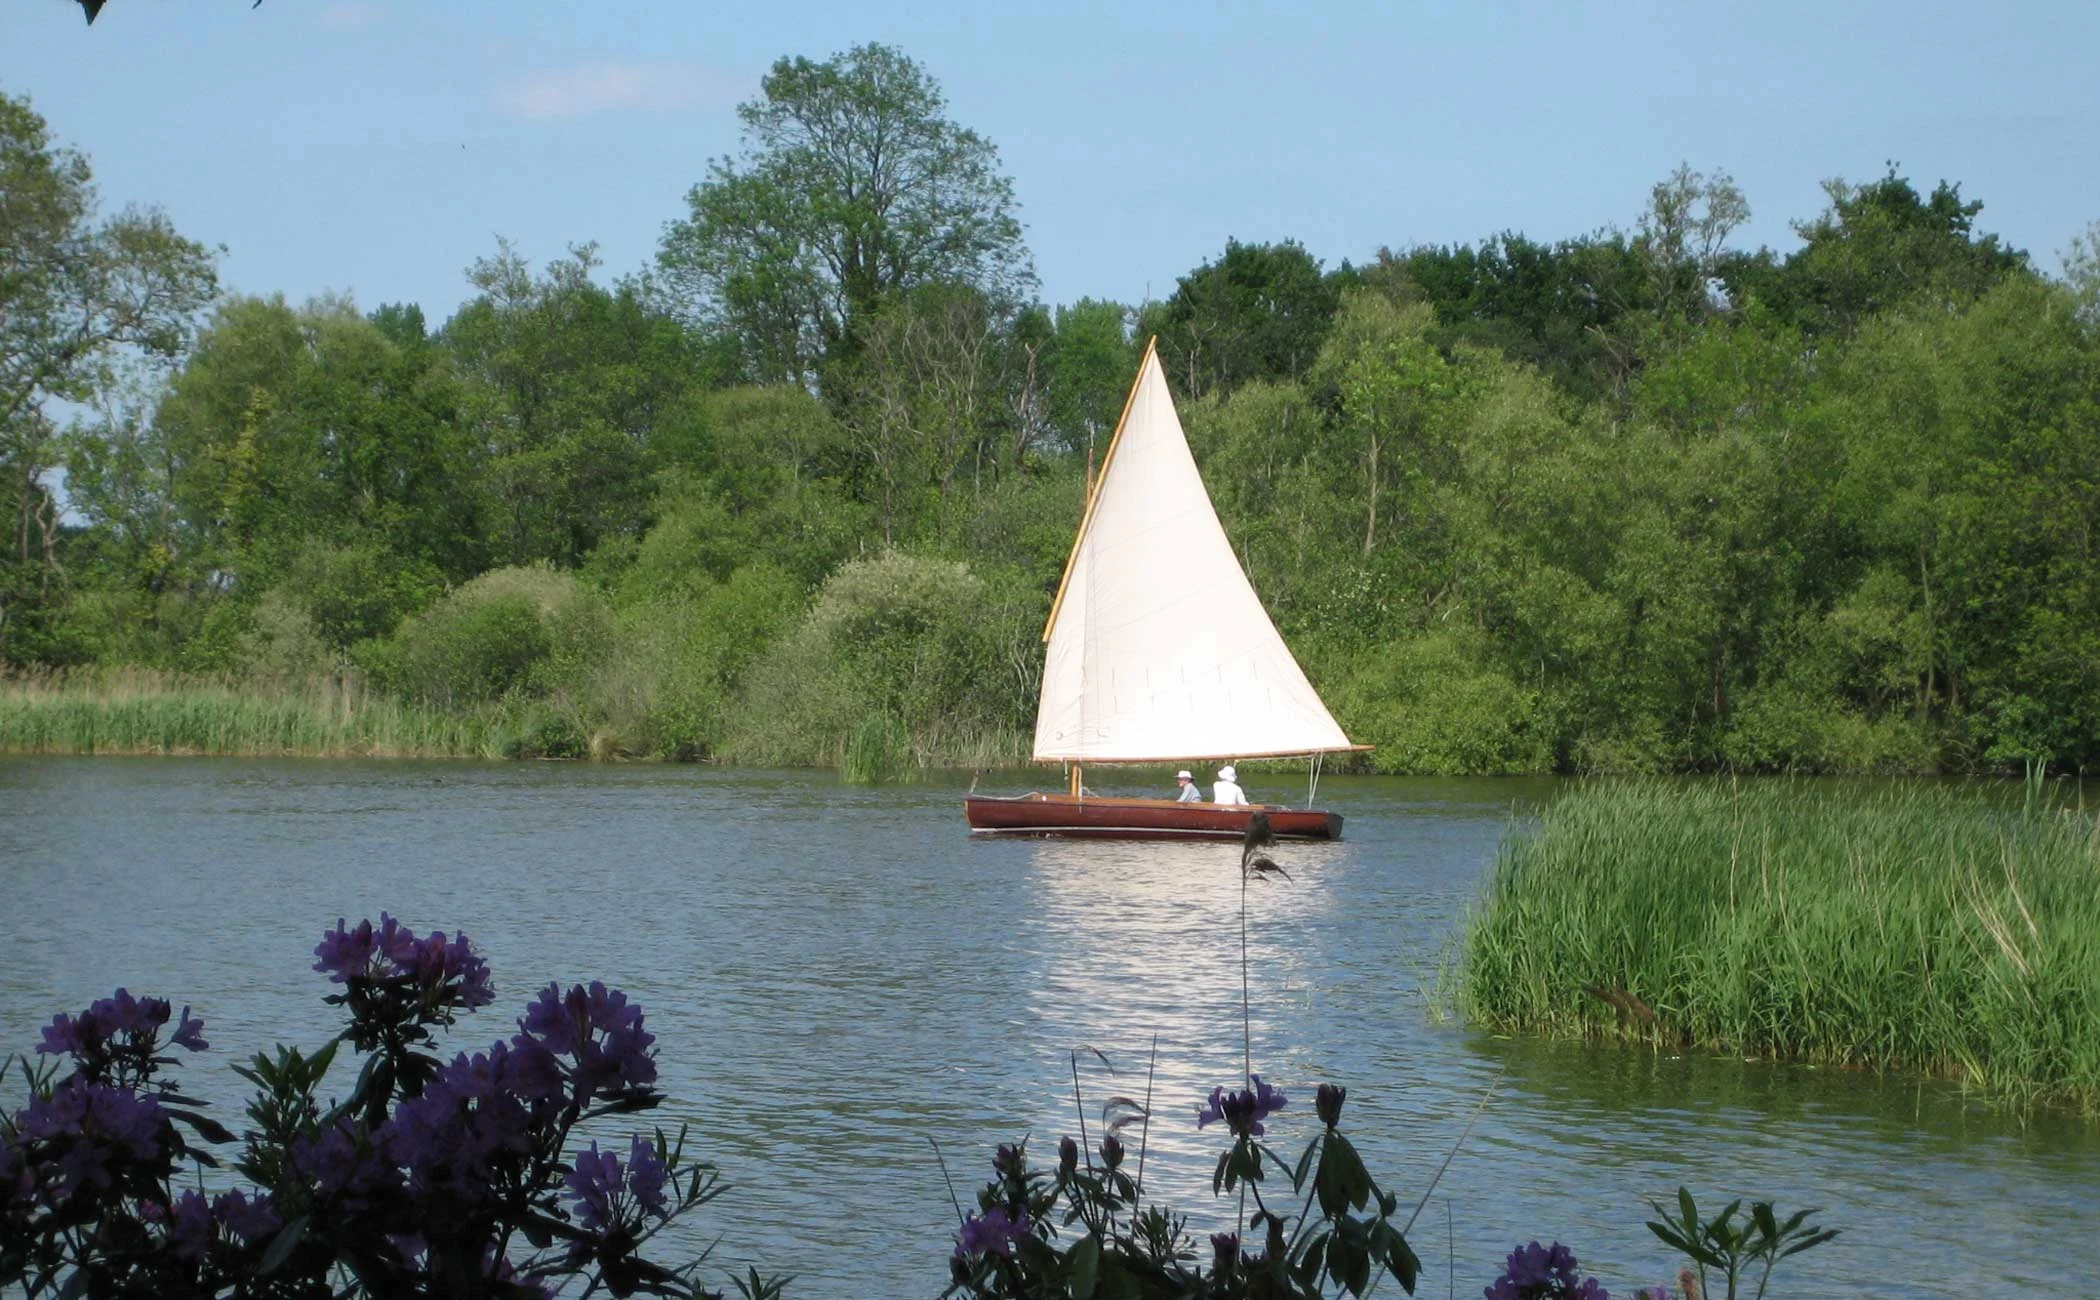 Brown bess sails the Norfolk Broads, a traditional wooden single sailed balanced lug